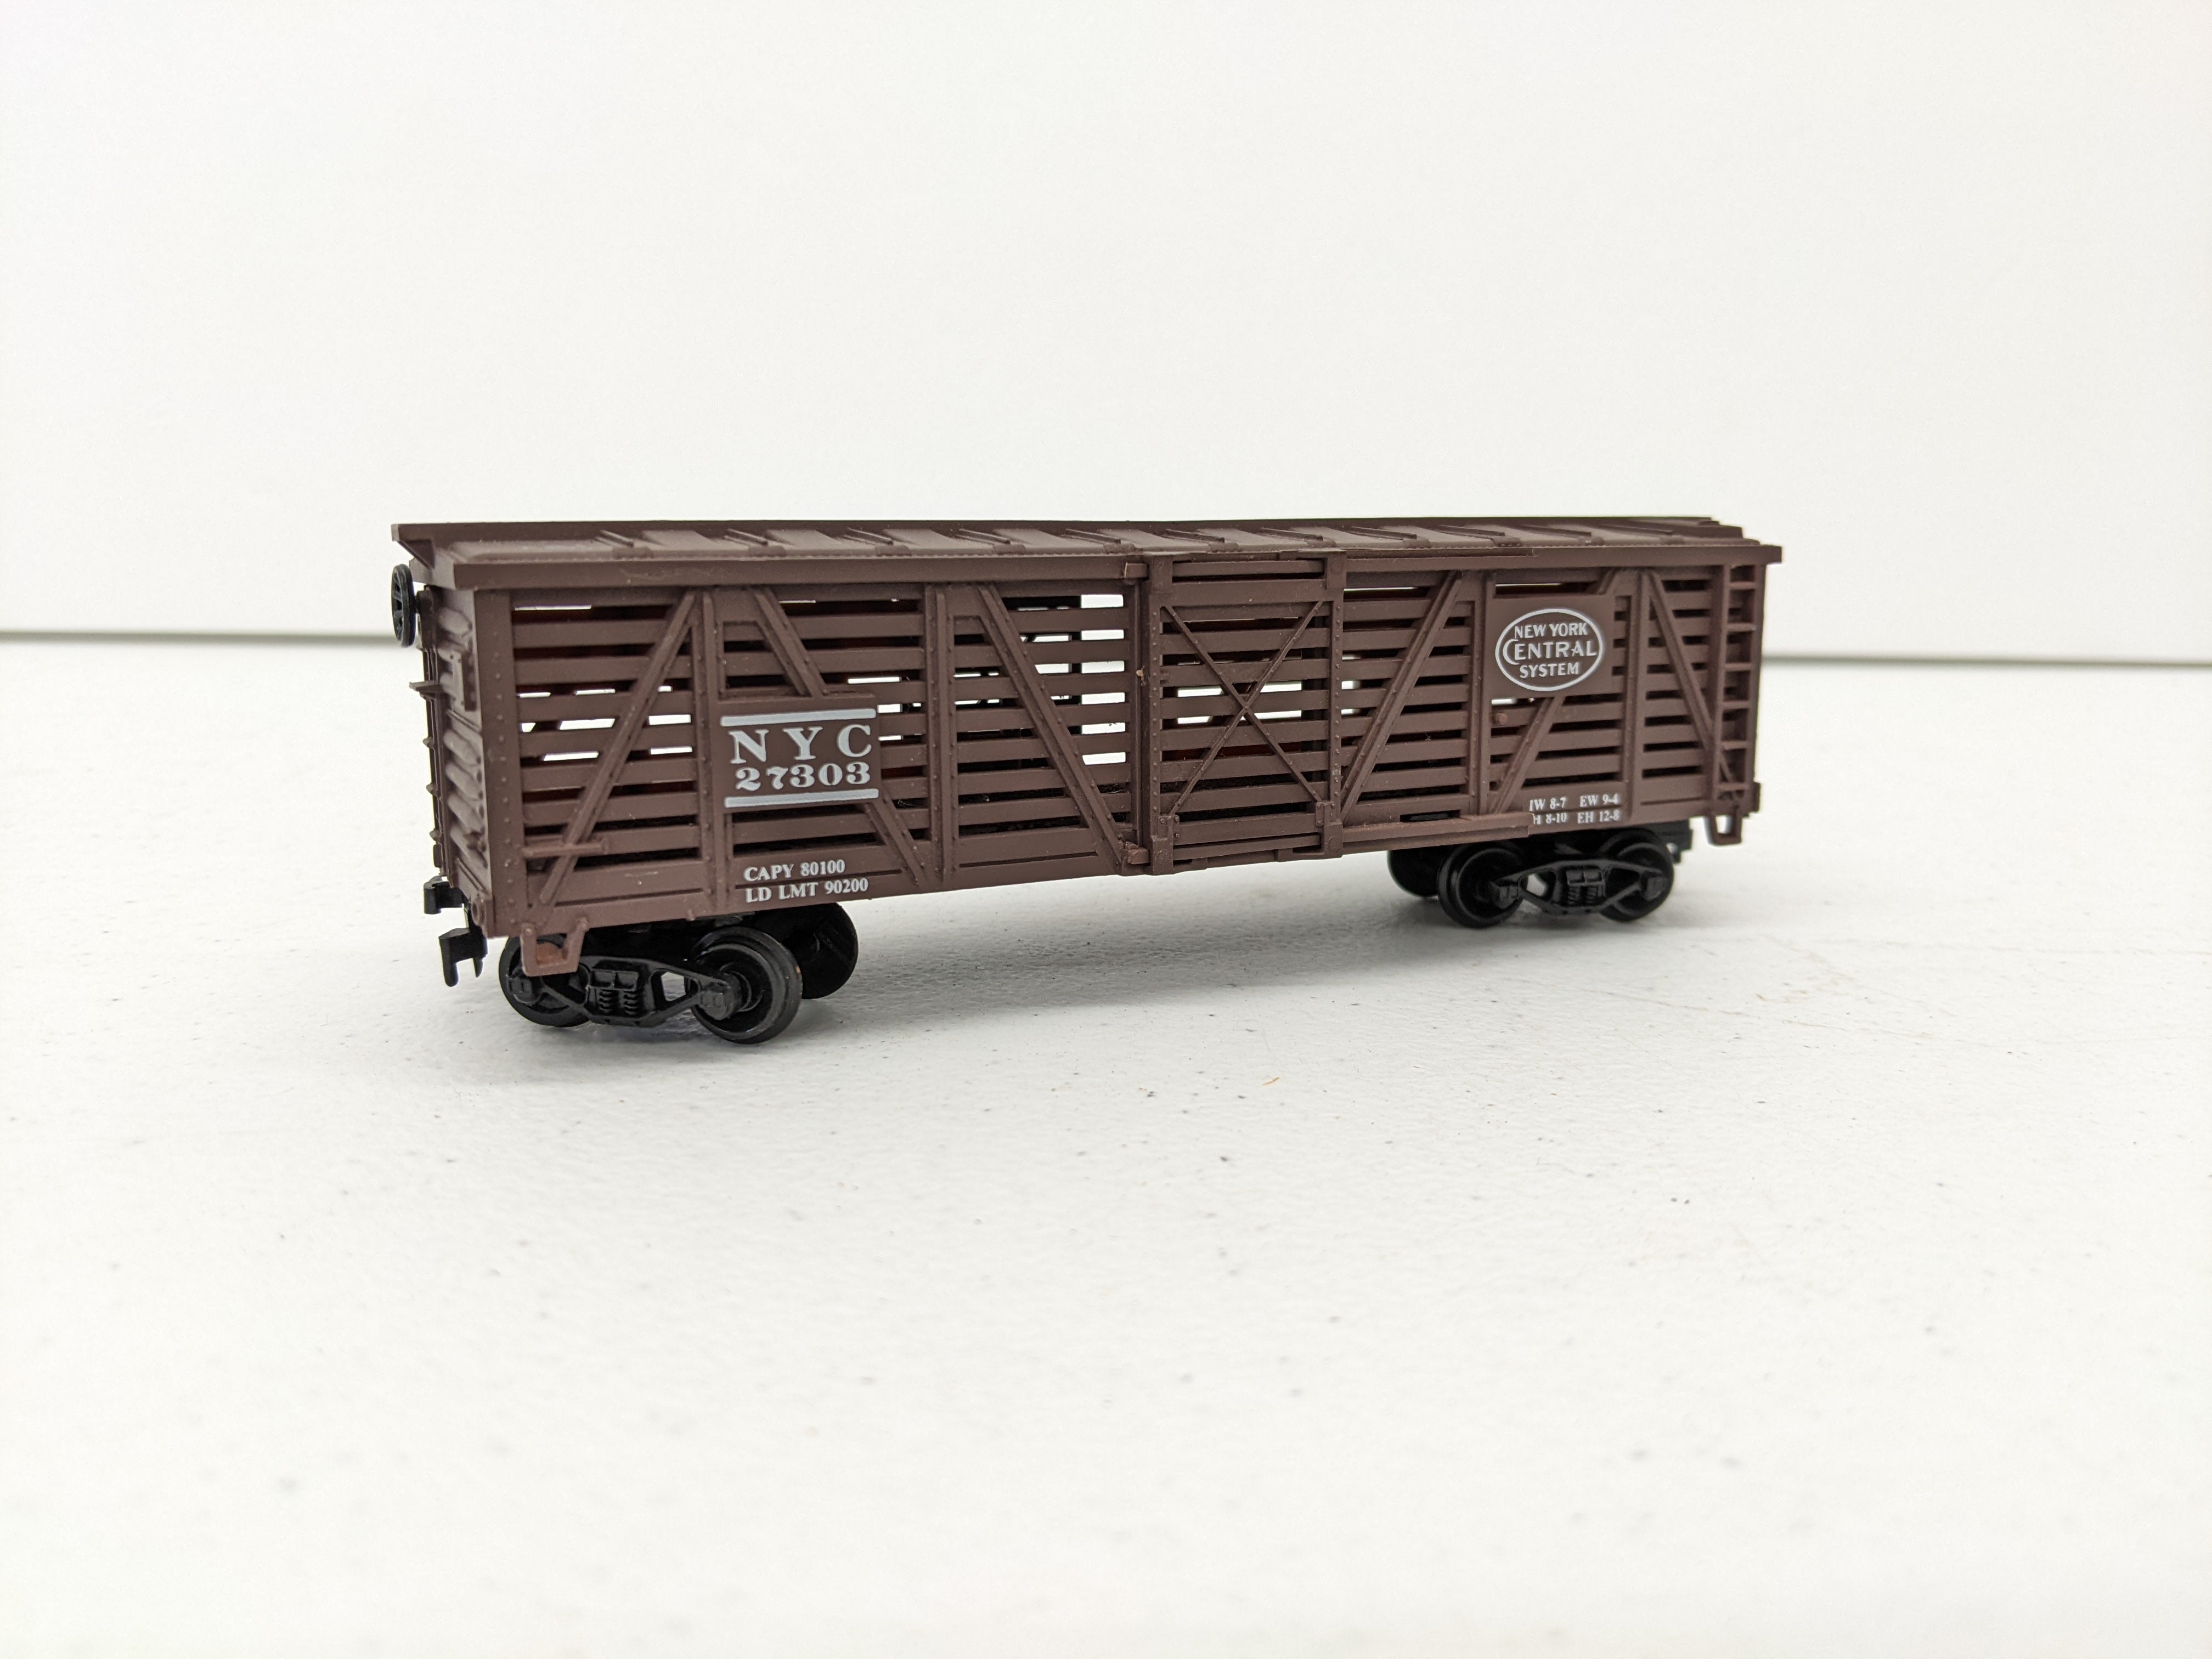 USED Life-Like HO Scale, 40' Stock Car, New York Central NYC #27303